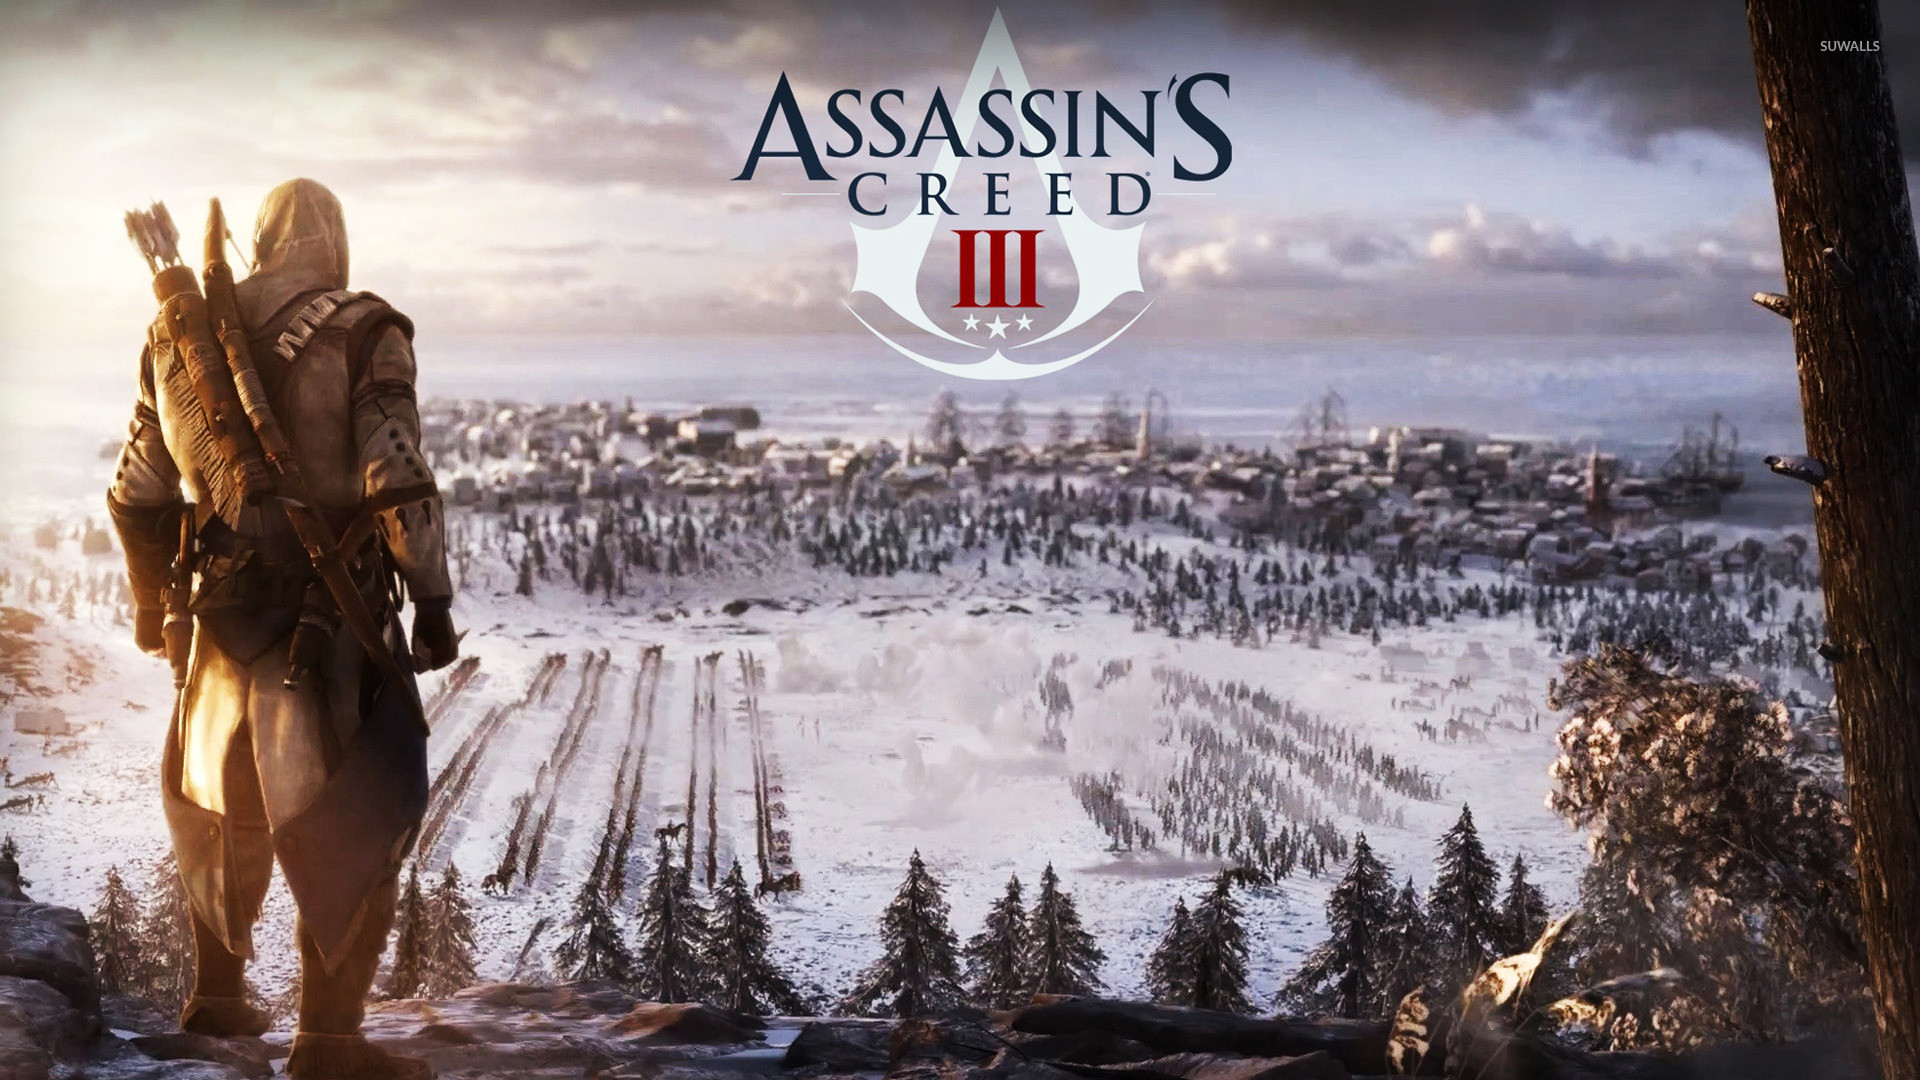 Assassin's Creed Iii , HD Wallpaper & Backgrounds